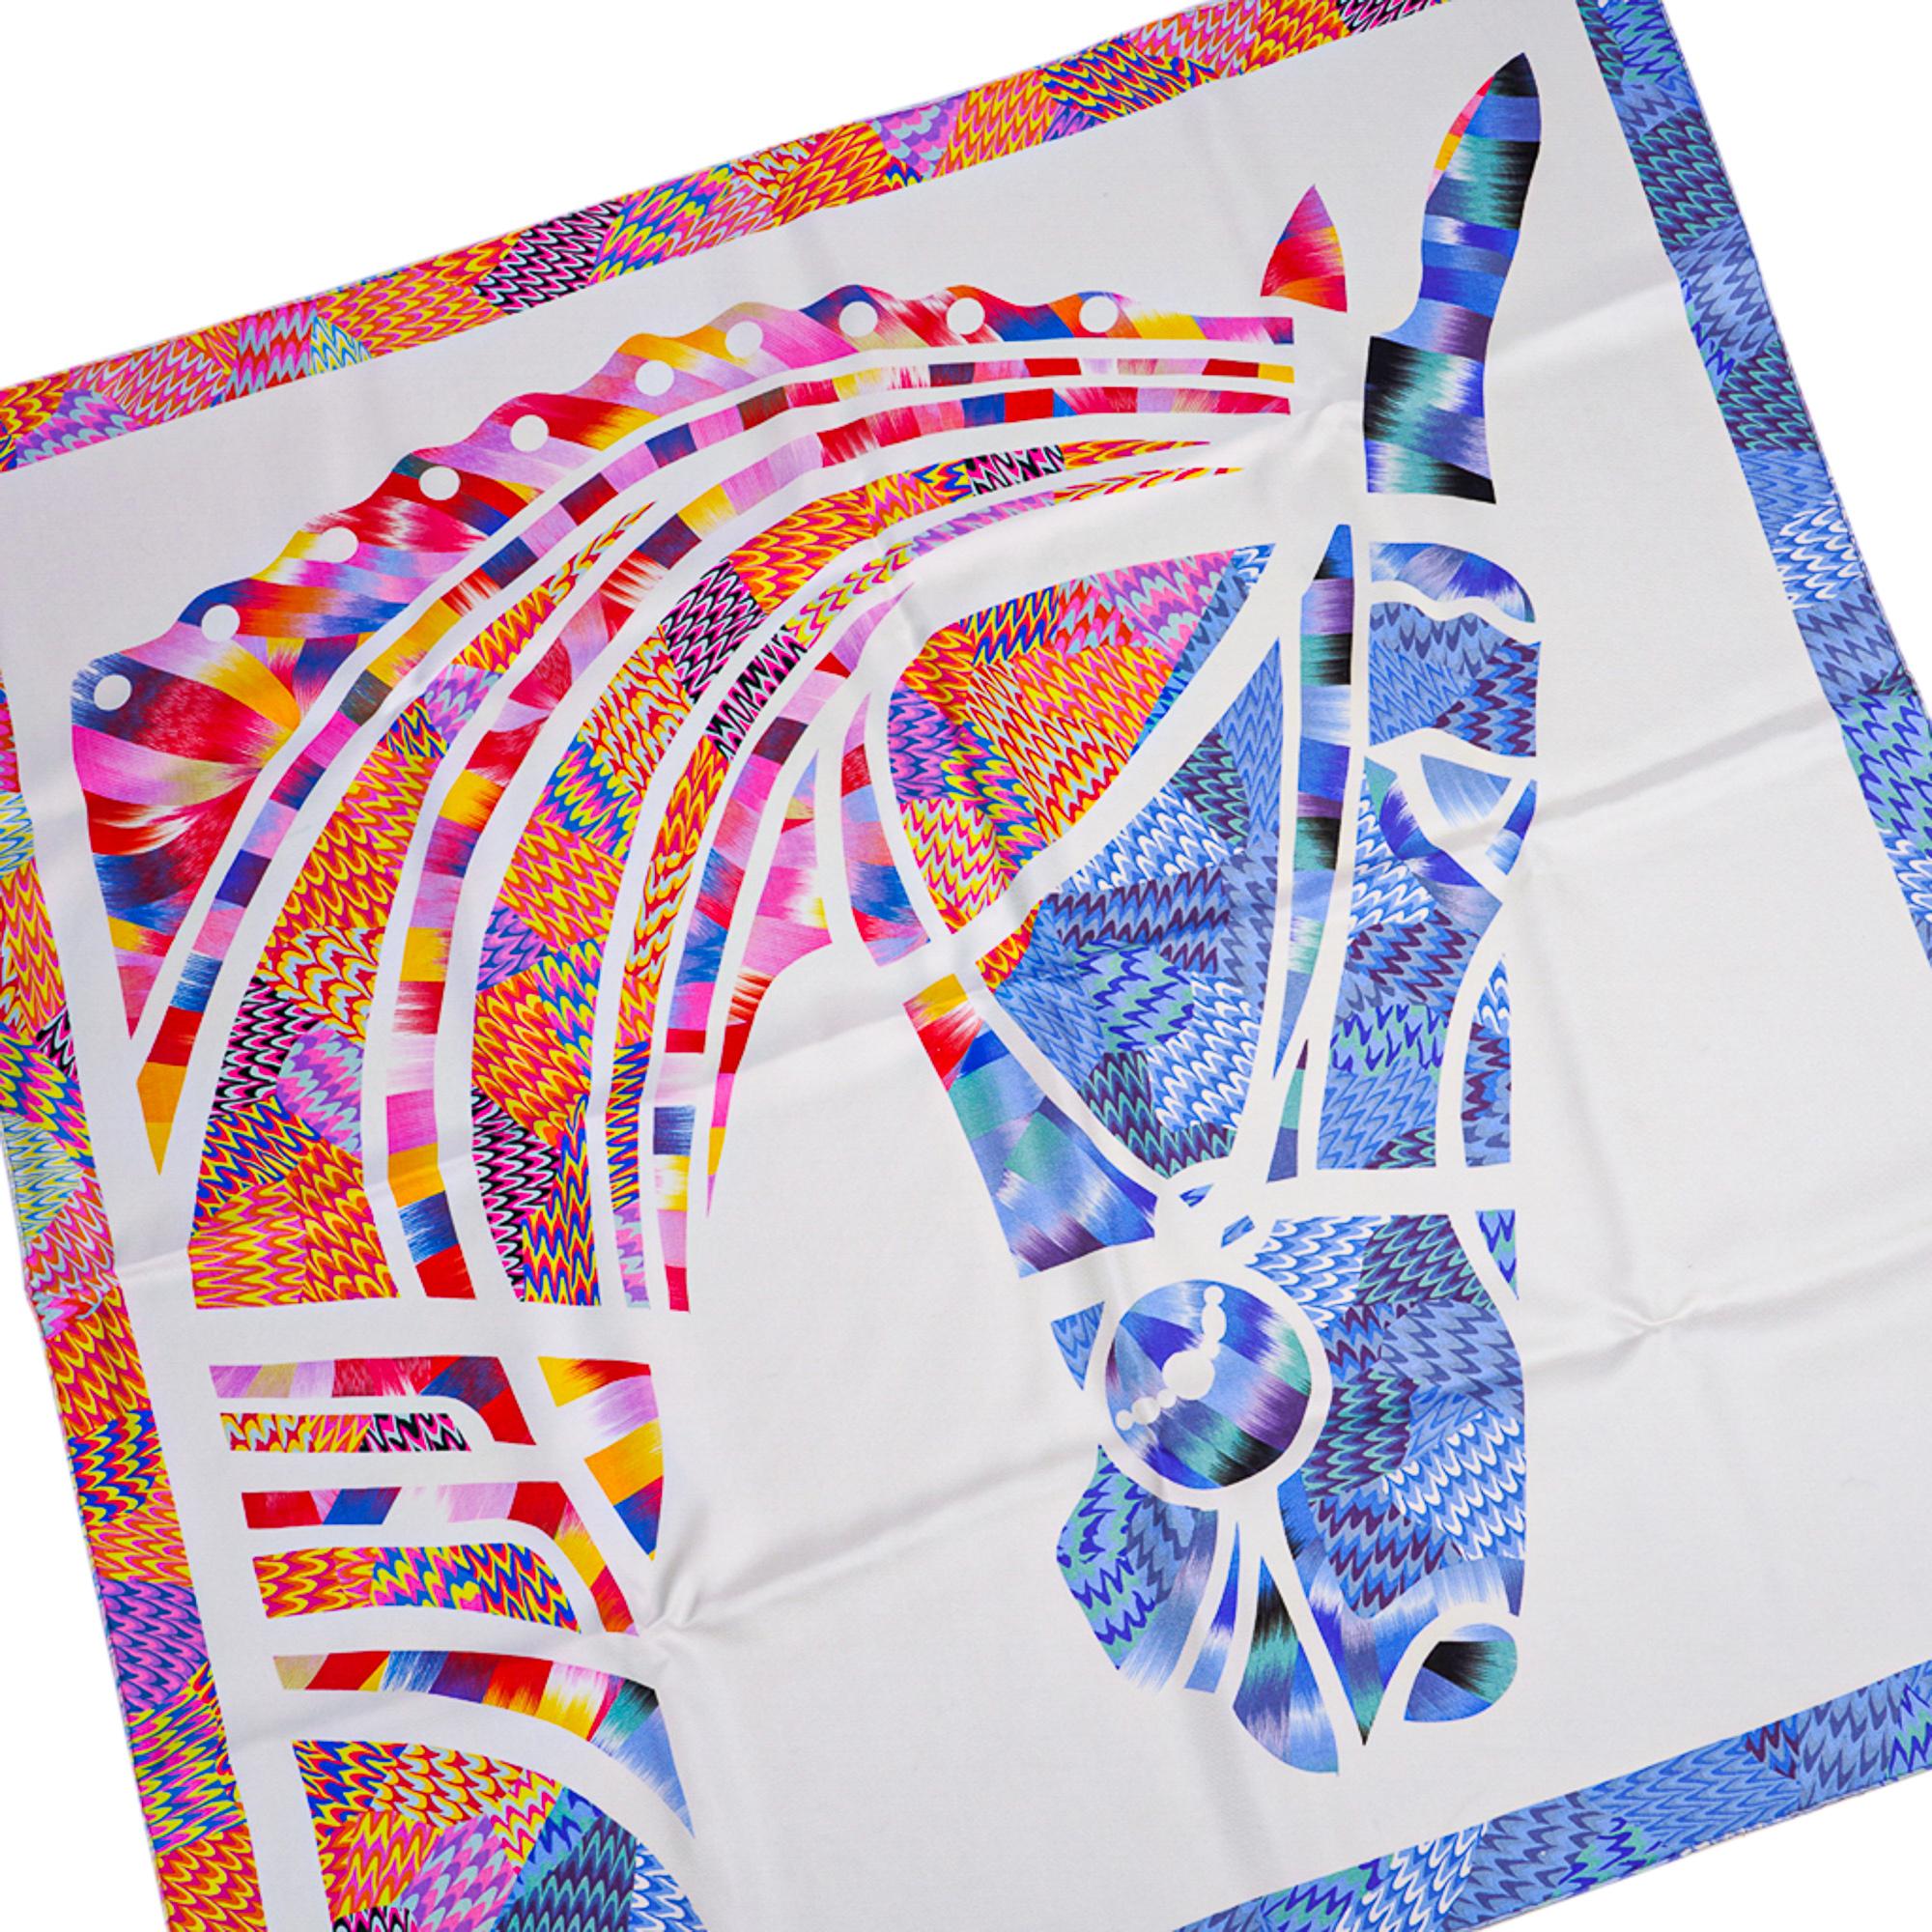 Mightychic offer a guaranteed authentic Limited Edition Hermes Robe Du Soir Marble Scarf.
This exquistie scarf is a must have for any Hermes collector.
Created by by an art almost lost to the world it brings you the most delicate production of